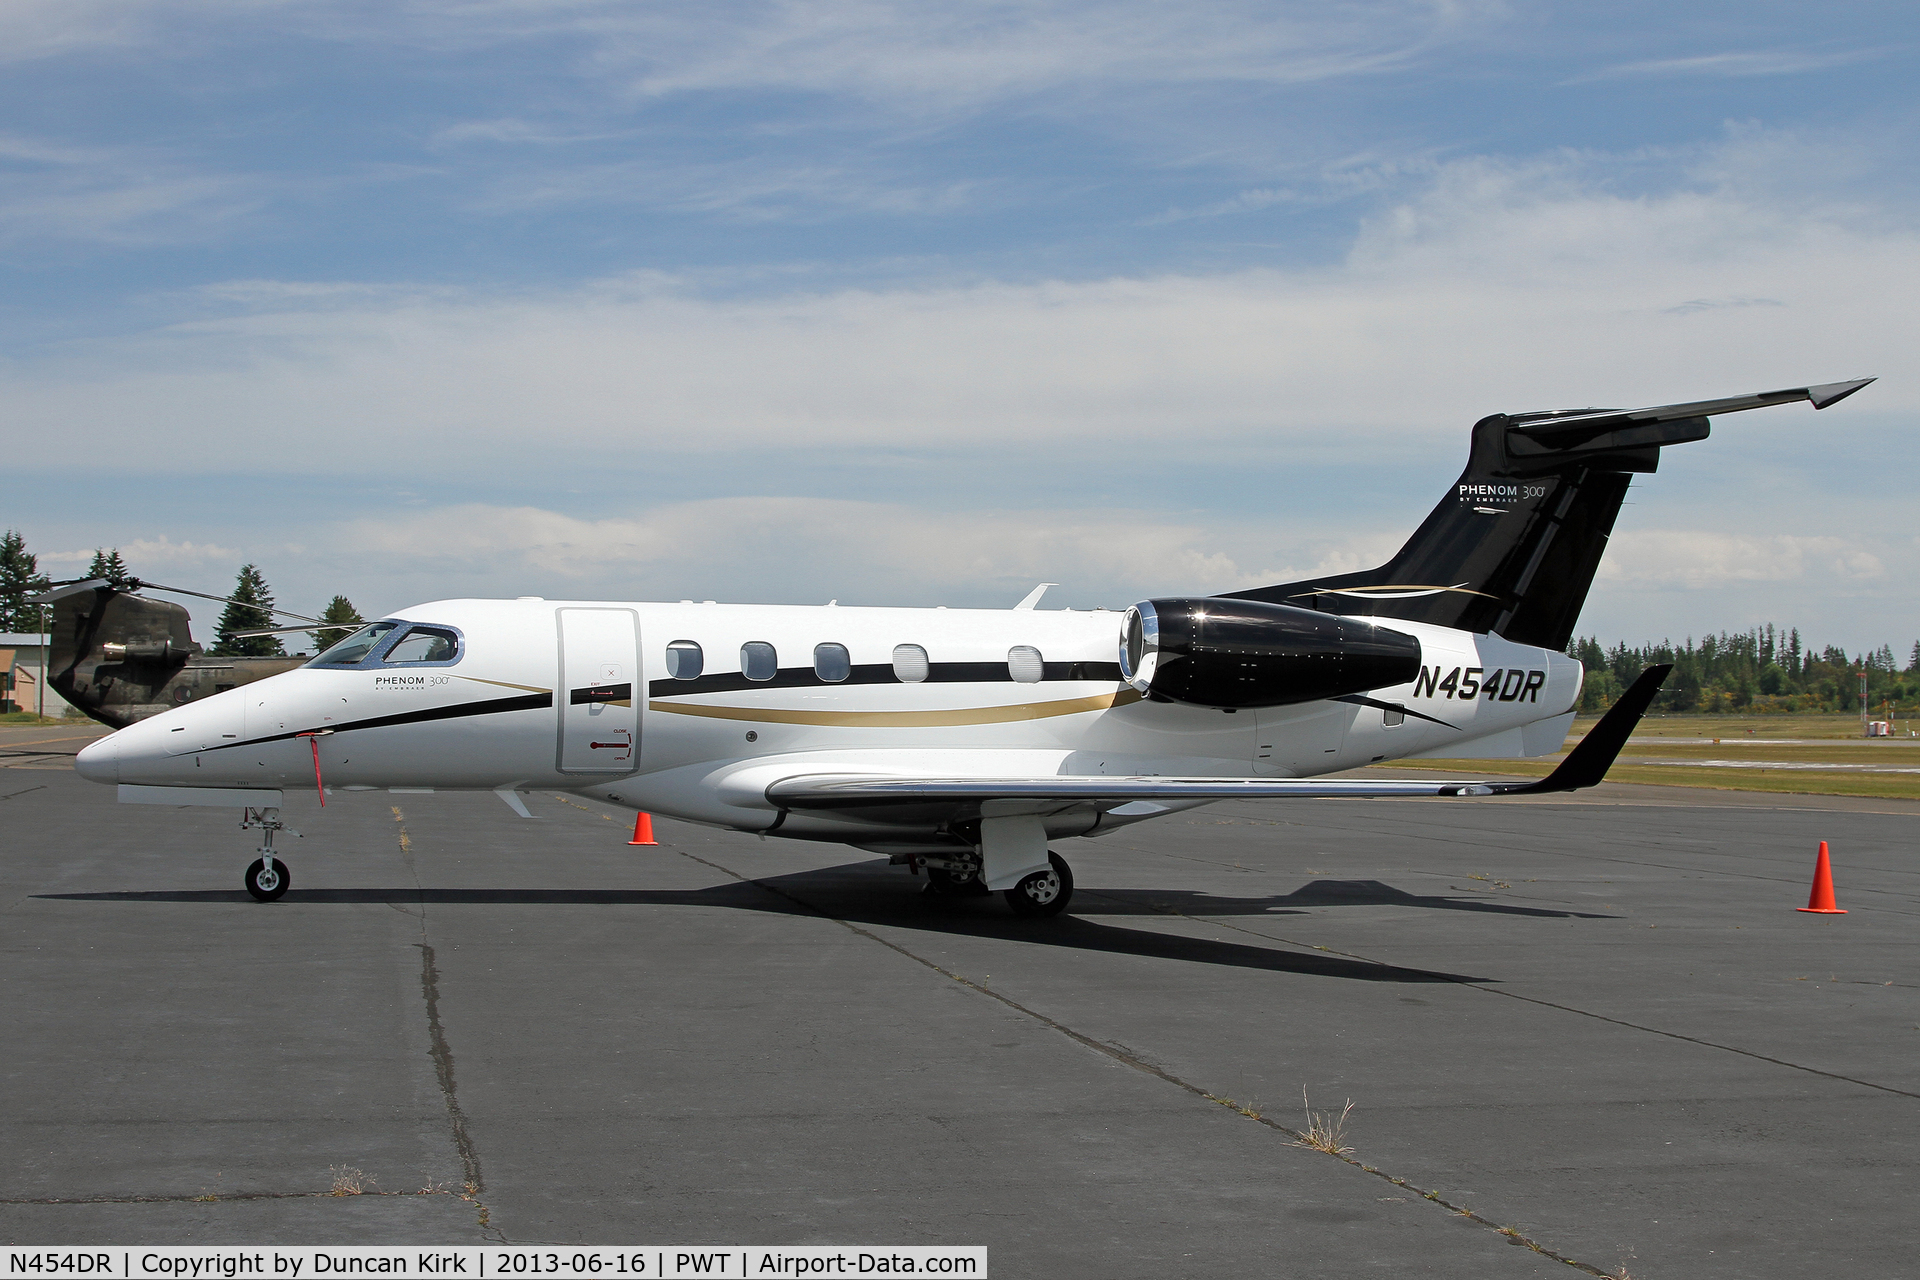 N454DR, 2009 Embraer EMB-505 Phenom 300 C/N 50500005, Looking quite nice for a Sunday on Bremerton's ramp!